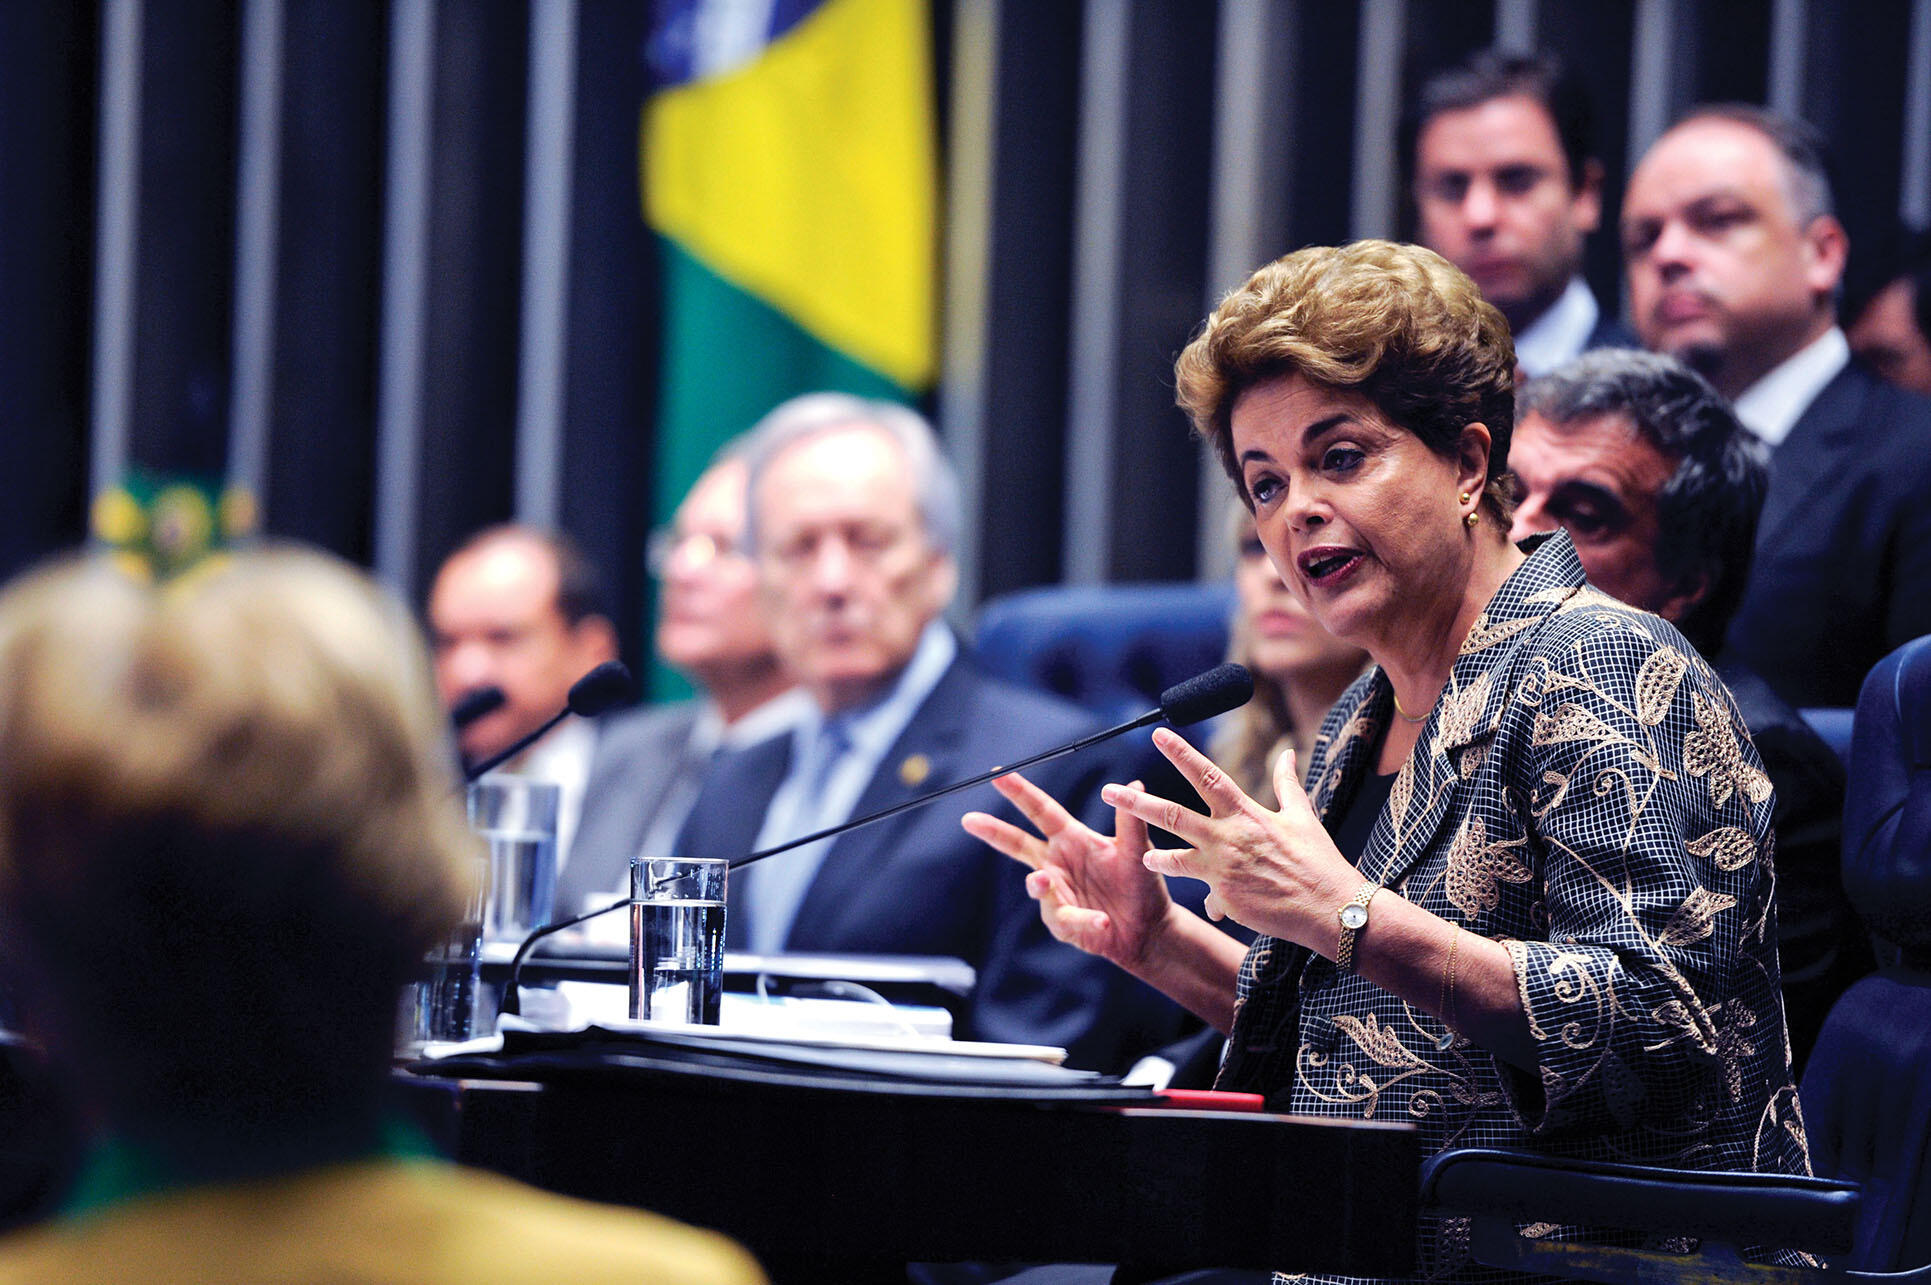 President Dilma Rousseff argues her case during her impeachment proceedings,  August 2016. (Photo courtesy of Senado Federal.)